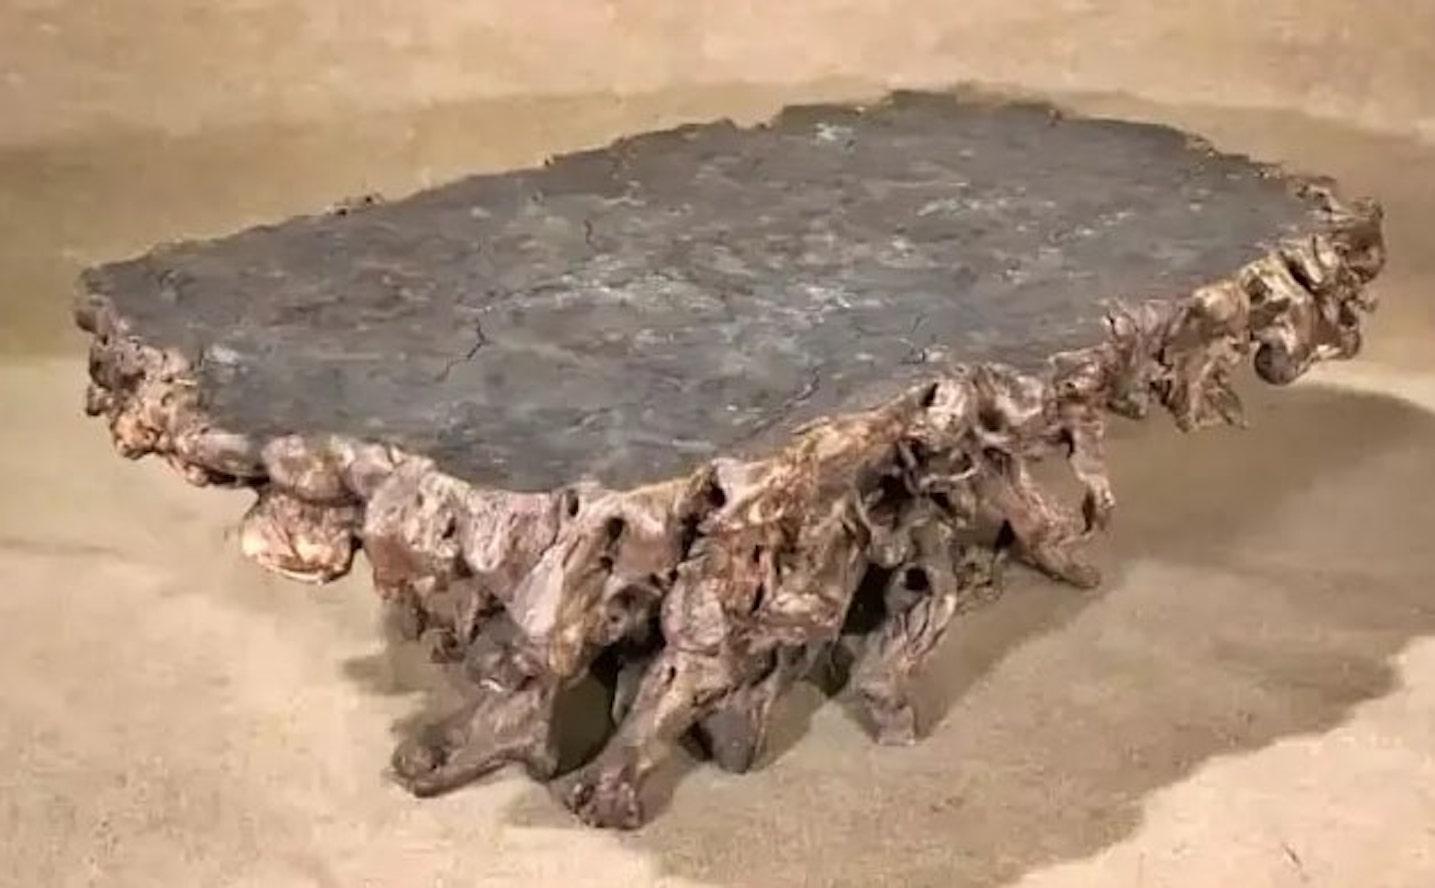 Large teak wood root coffee table. Over five feet long, this heavy table can be used inside or in your garden.
Please confirm location NY or NJ